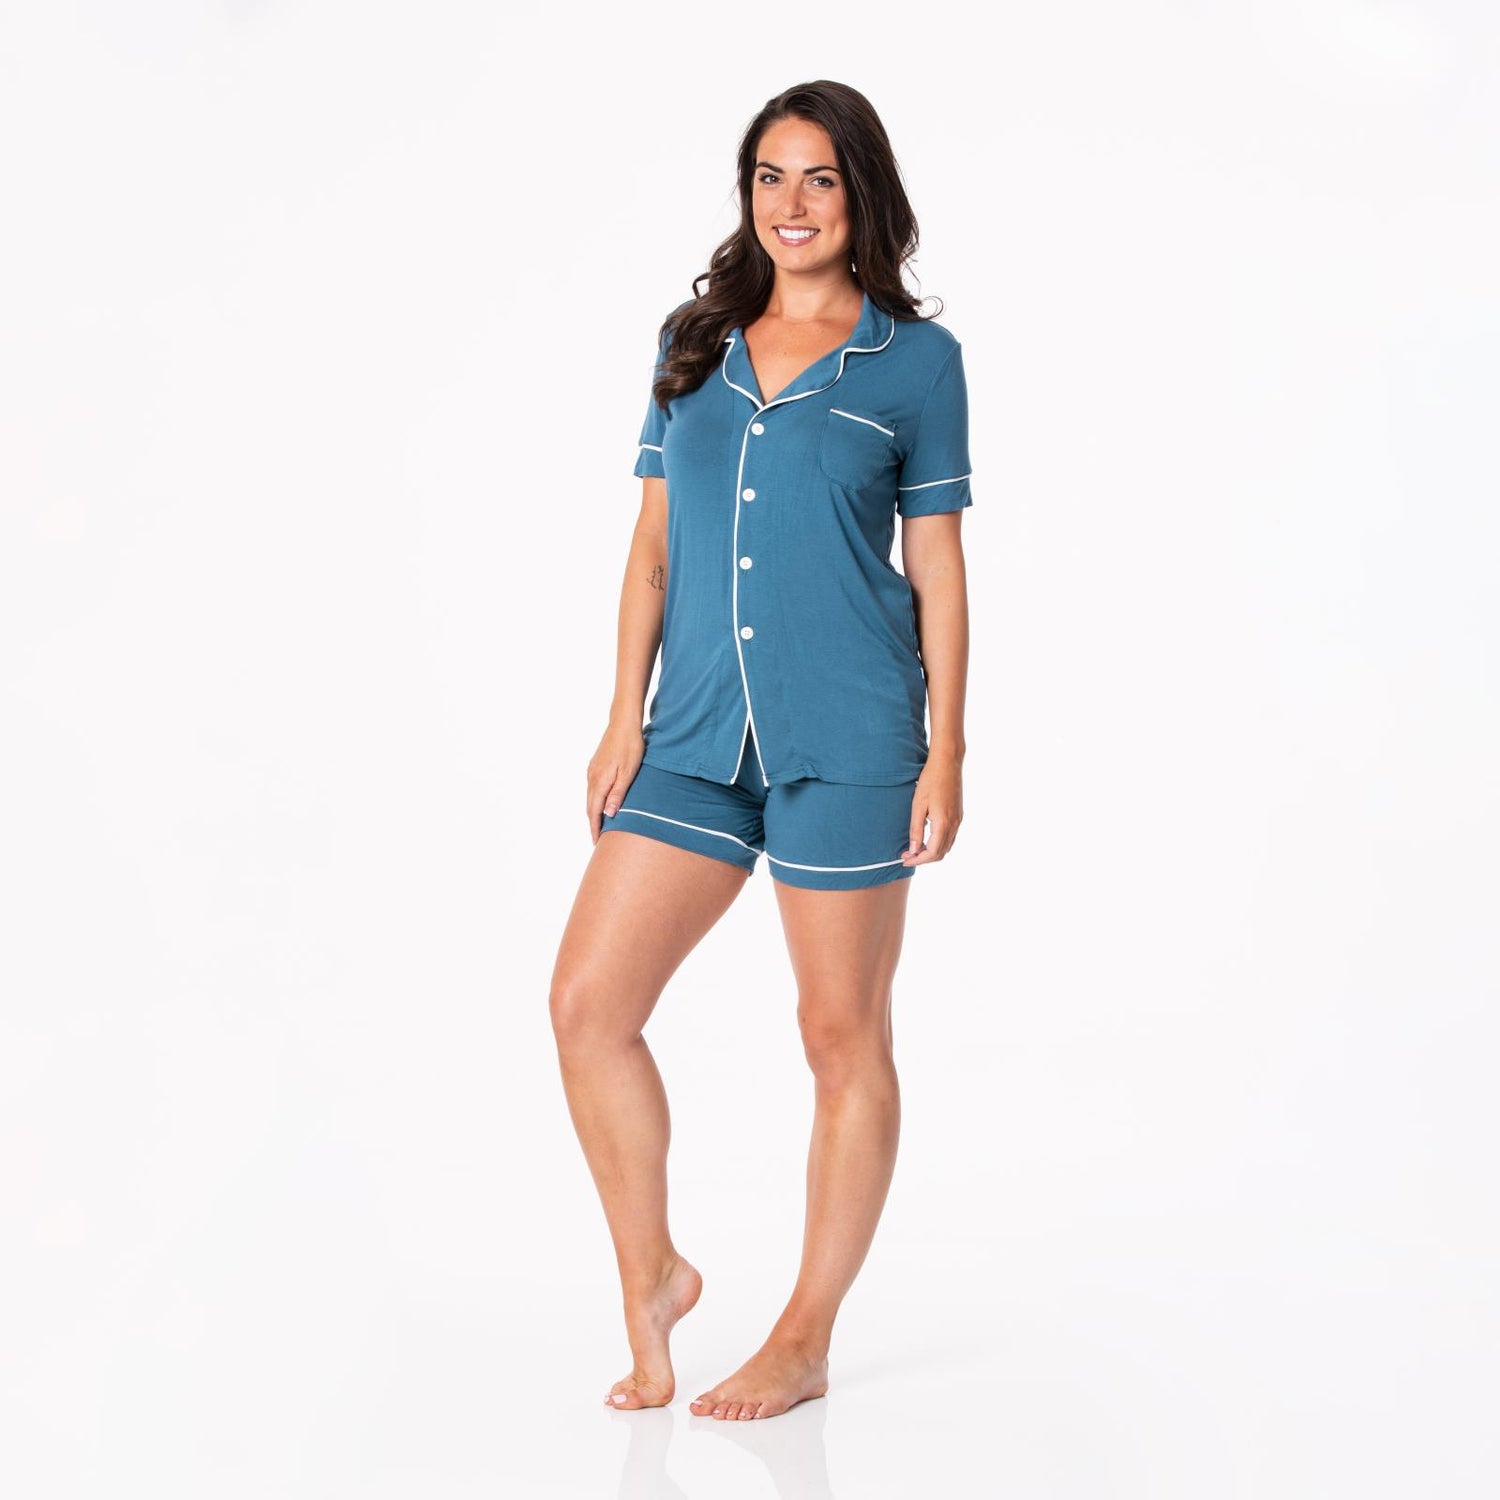 Women's Solid Short Sleeve Collared Pajama Set with Shorts in Deep Sea with Natural